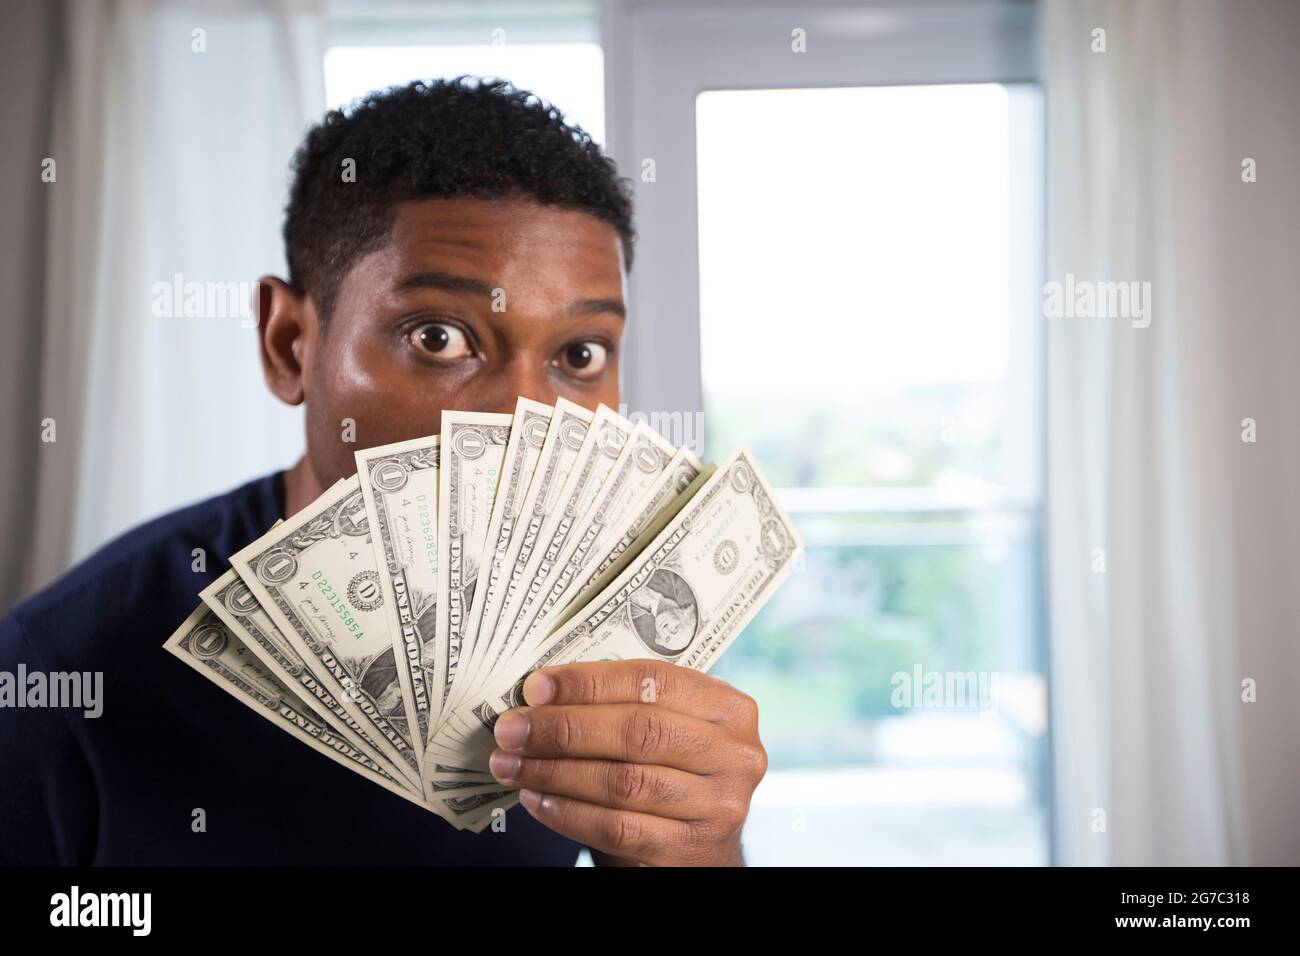 African American man holds up us currency to his face with eyes wide open, camera focuses on the money. Stock Photo